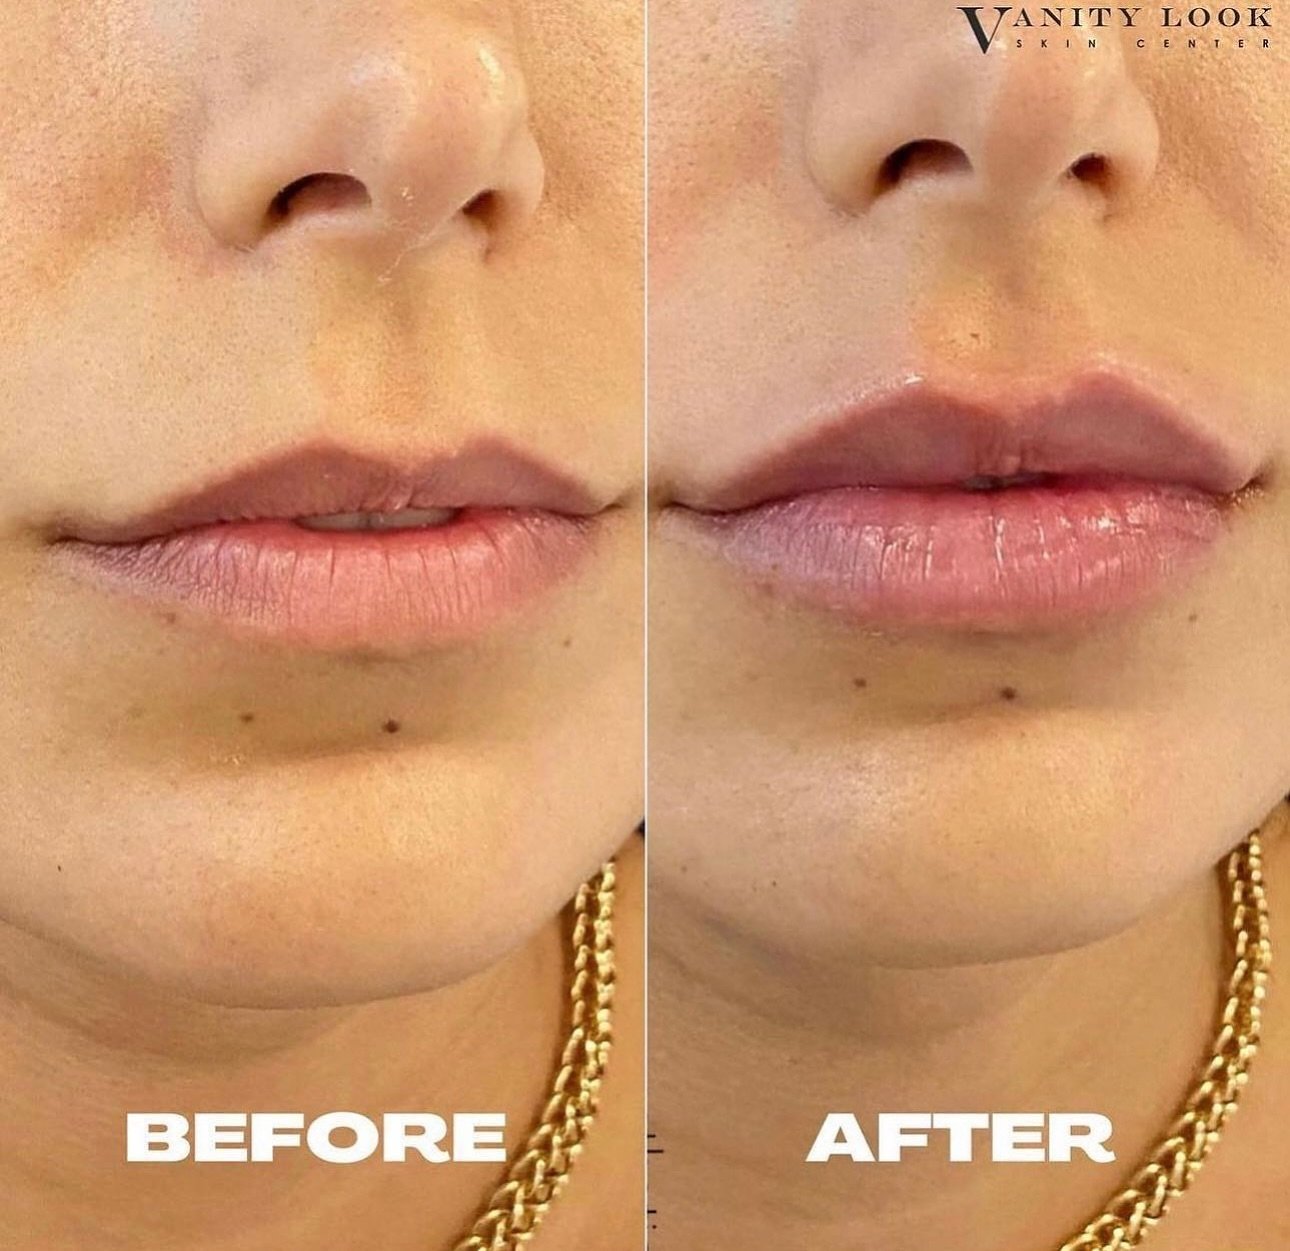 KYSSE lips! 👄 A subtle plump with border definition using Restyle Kysse. 

Call us at (818) 290-3938 to schedule an appointment!

#antiwrinkle #browlift #facelift #hyaluronicacid #lipfillers #dermalfiller #nonsurgical #lipaugmentation #dysport #lipe